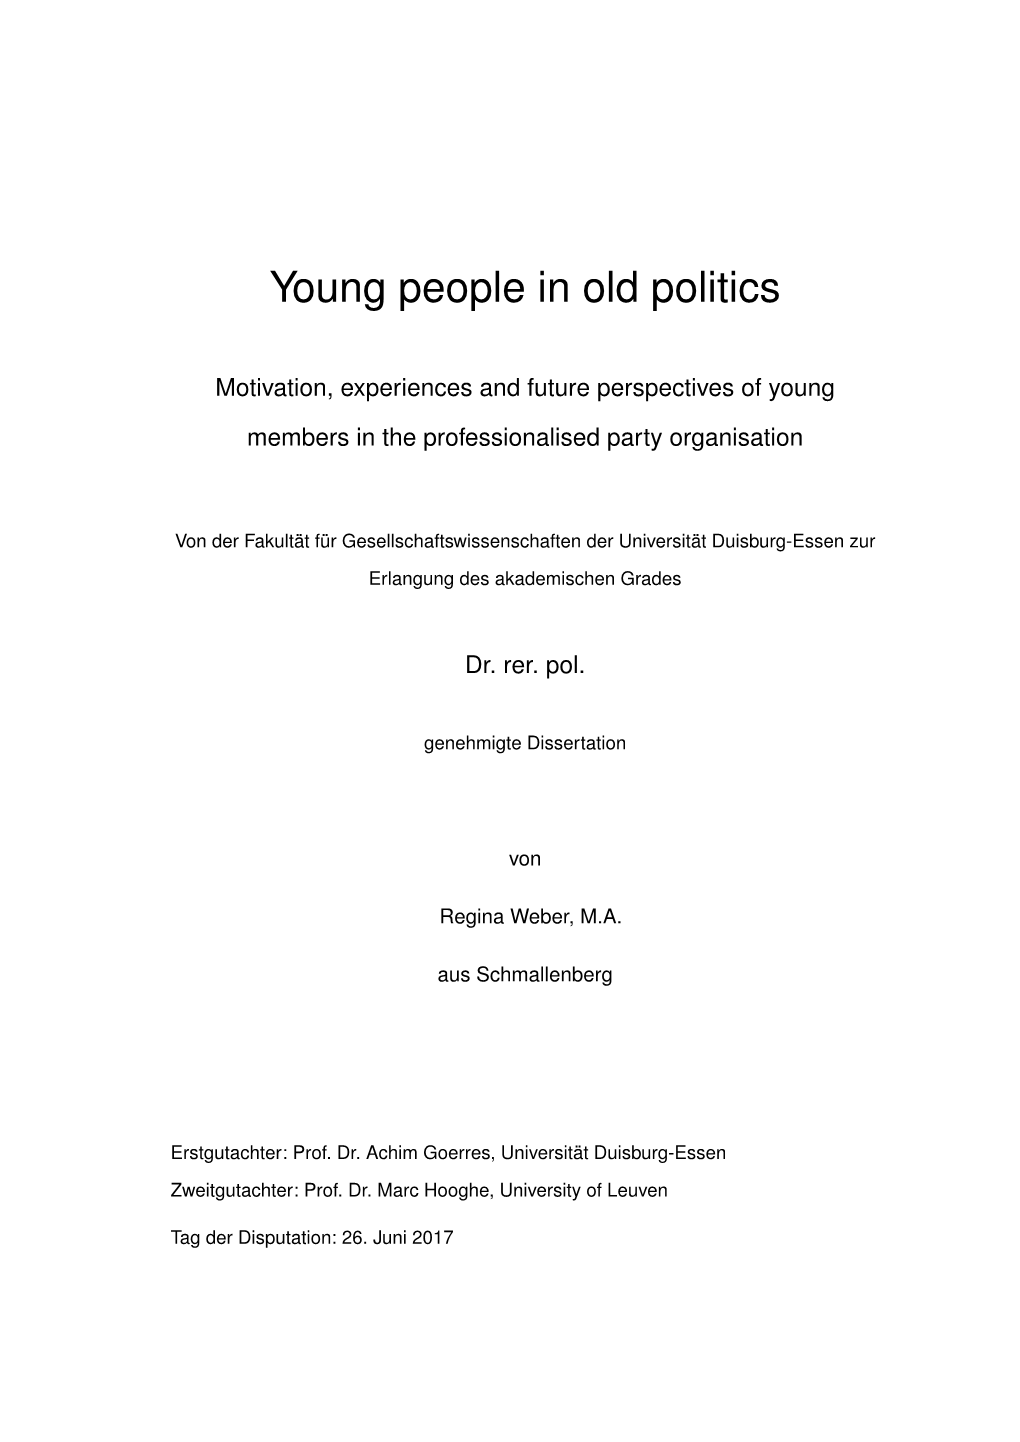 Young People in Old Politics